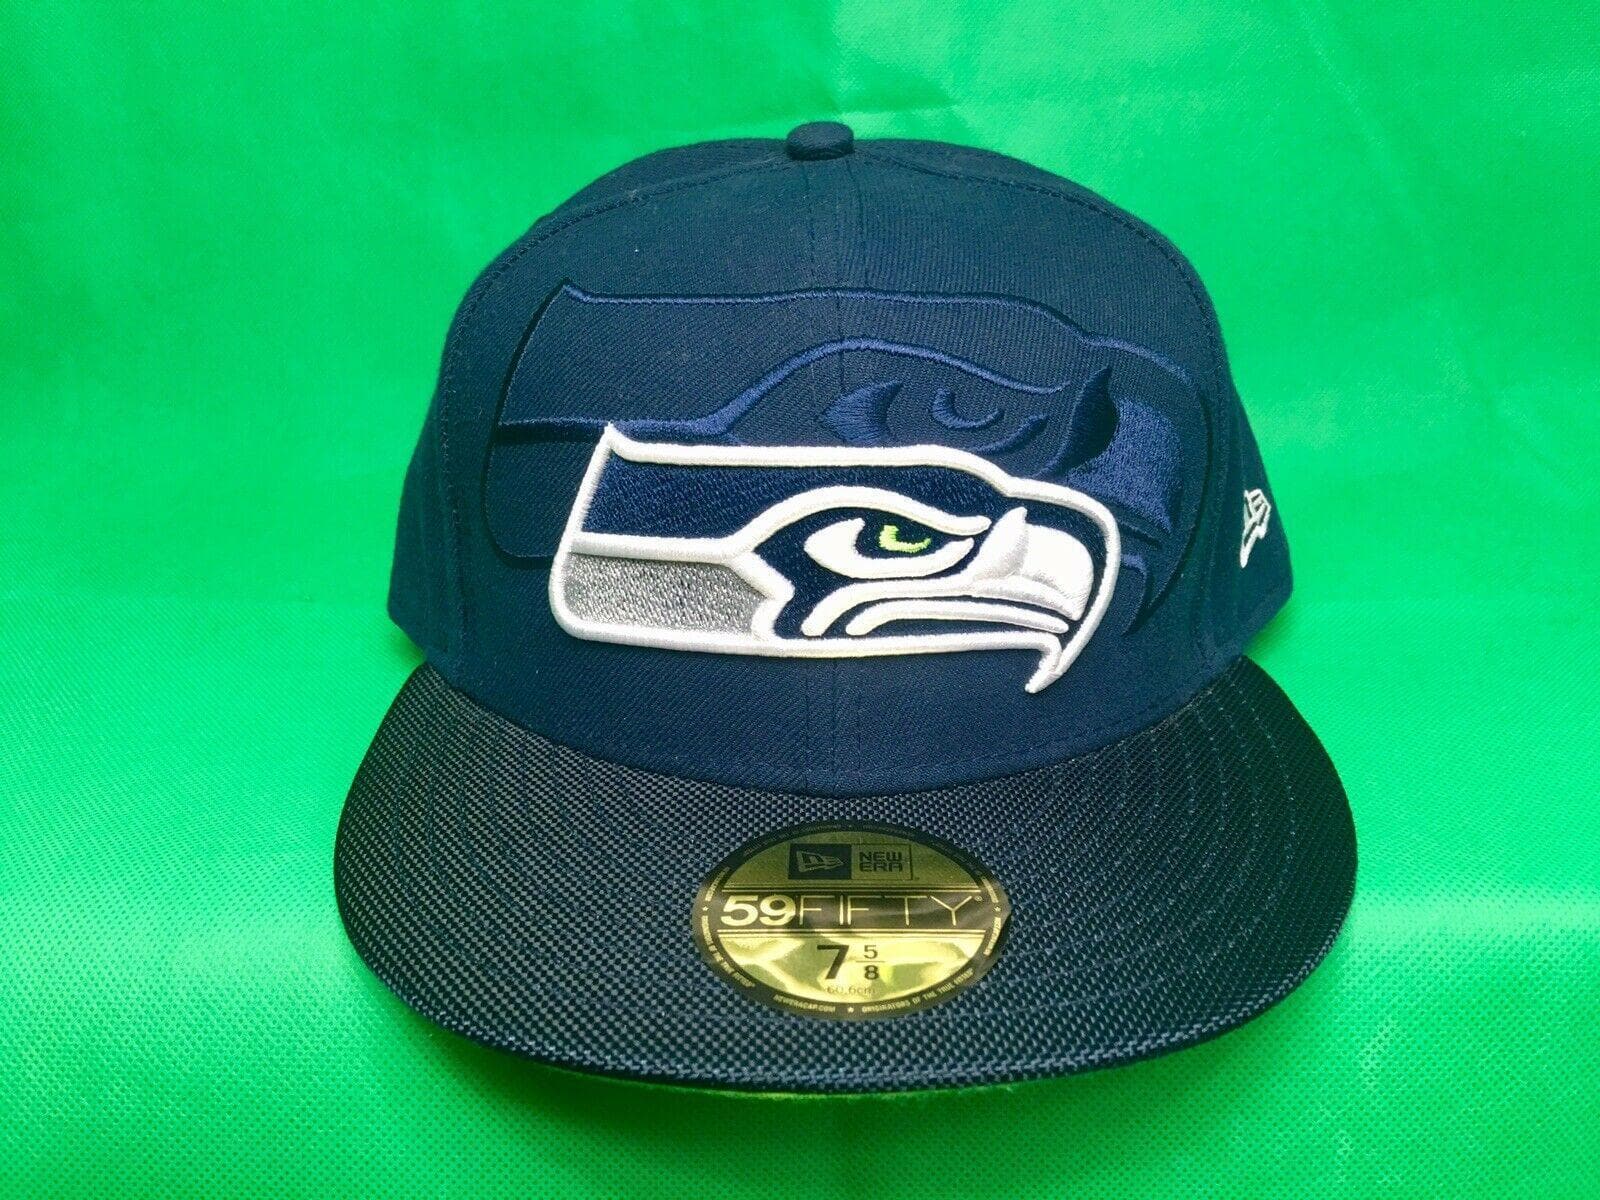 NFL Seattle Seahawks New Era 59FIFTY Fitted Baseball Hat/Cap 7-1/2 NWT